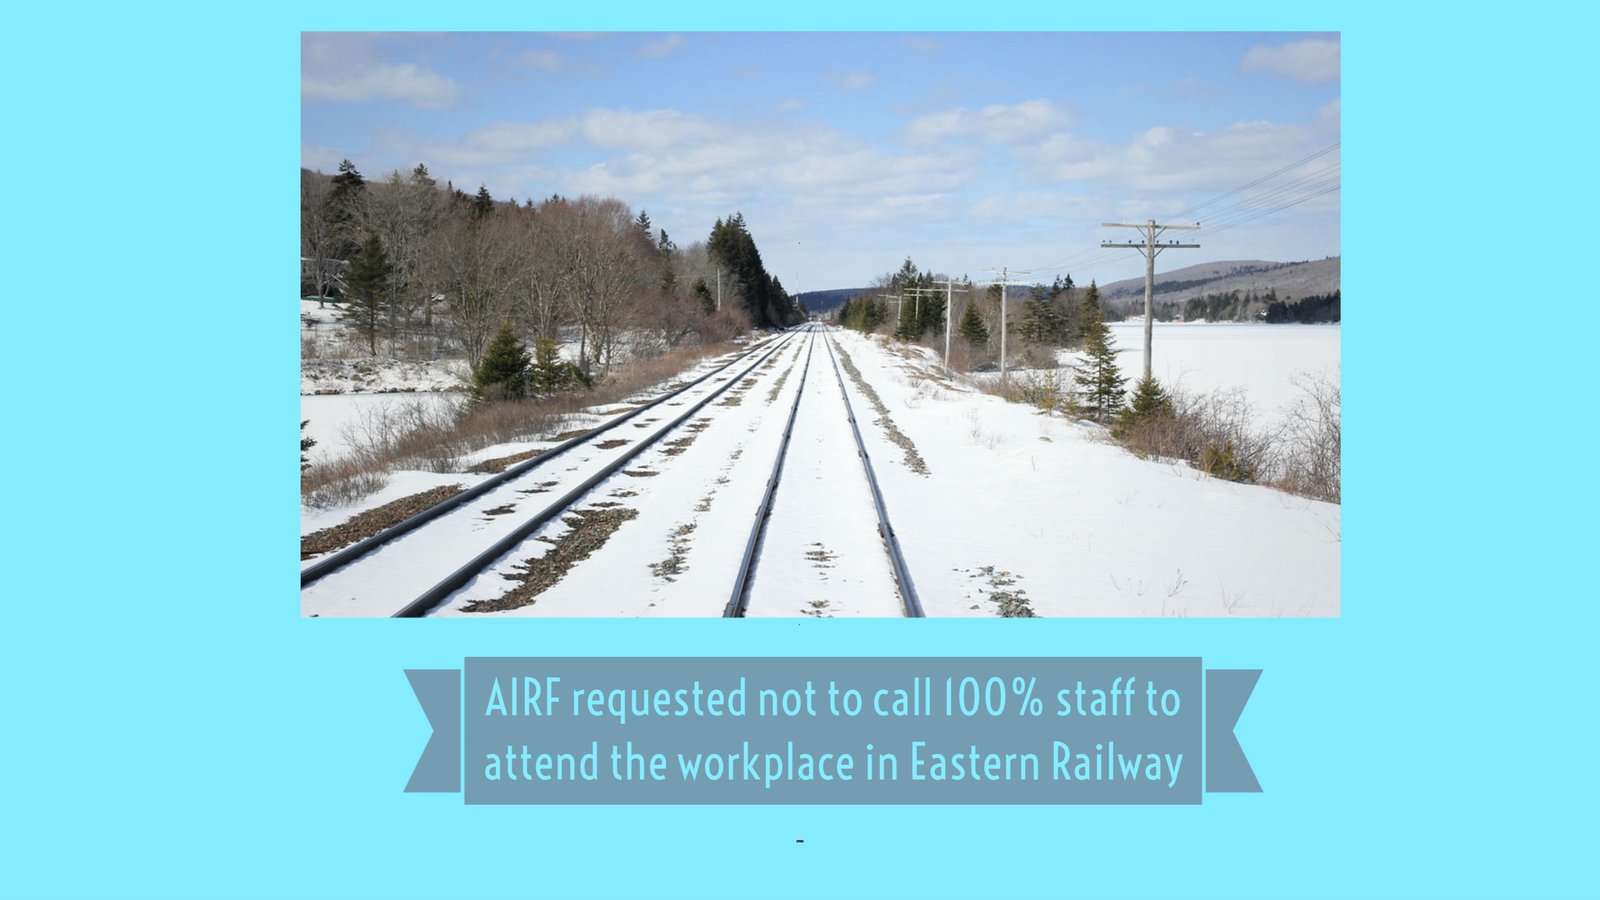 AIRF requested not to call 100% staff to attend the workplace in Eastern Railway